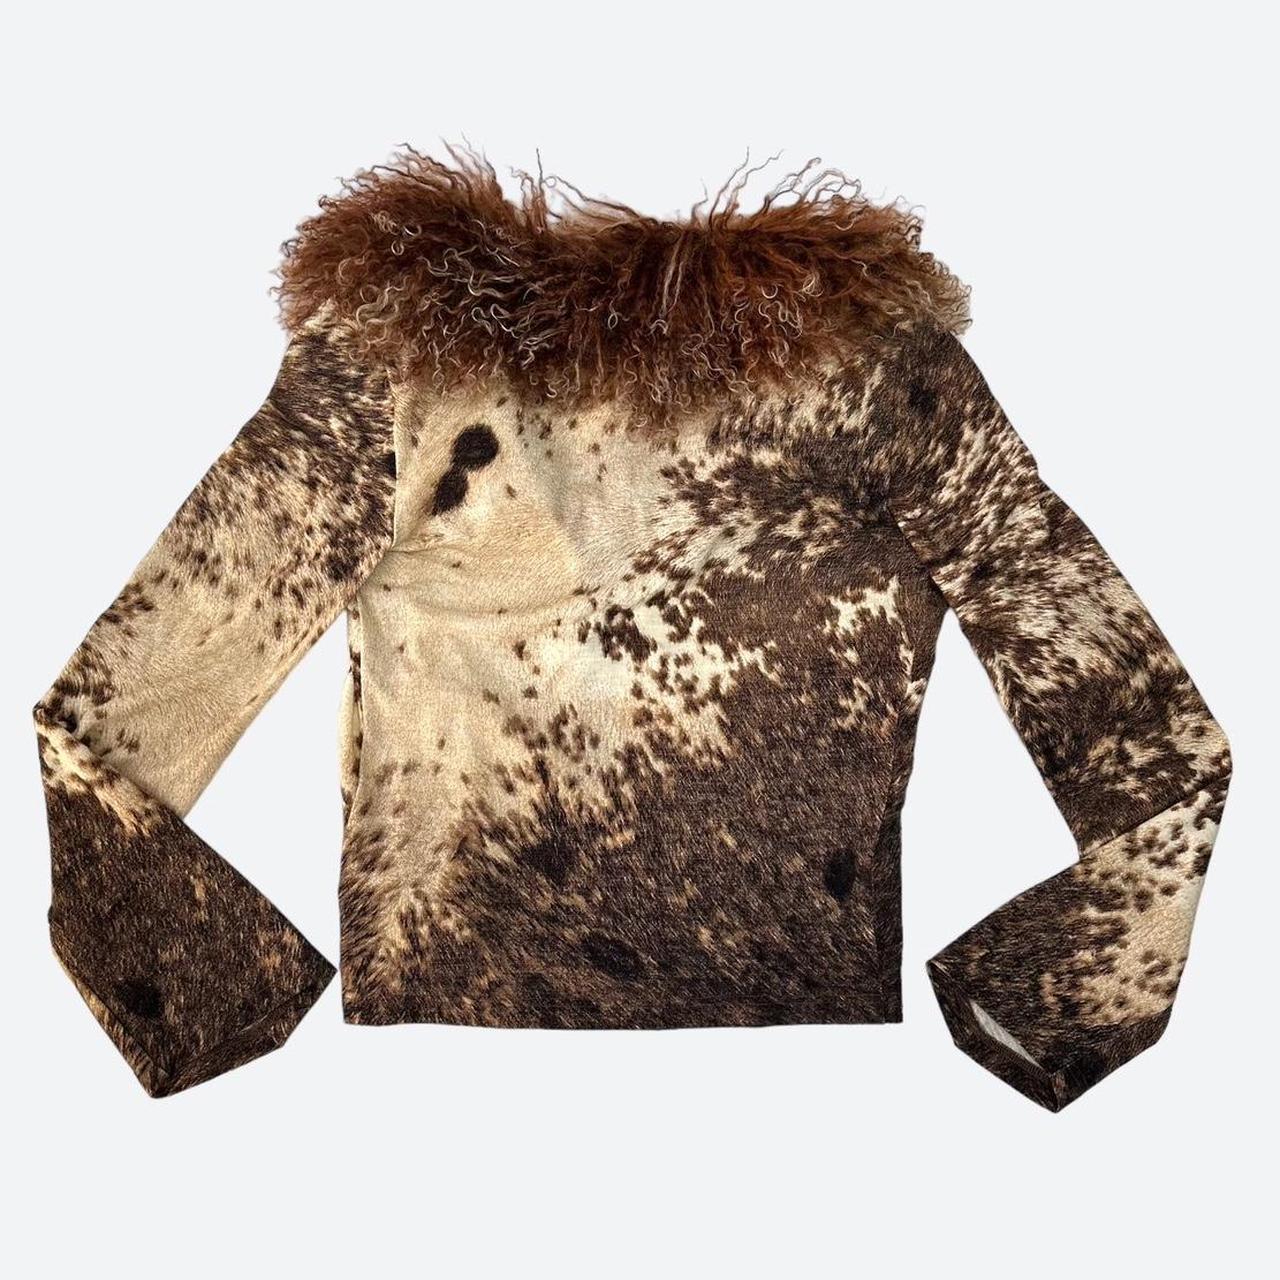 A jaw-dropping wool and fur cardigan in true late 90s style, this fabulous Roberto
Cavalli piece features the 1999 iconic horse print that is so instantly reminiscent of
the time. The print is all over in tan, brown and cream colors, and the